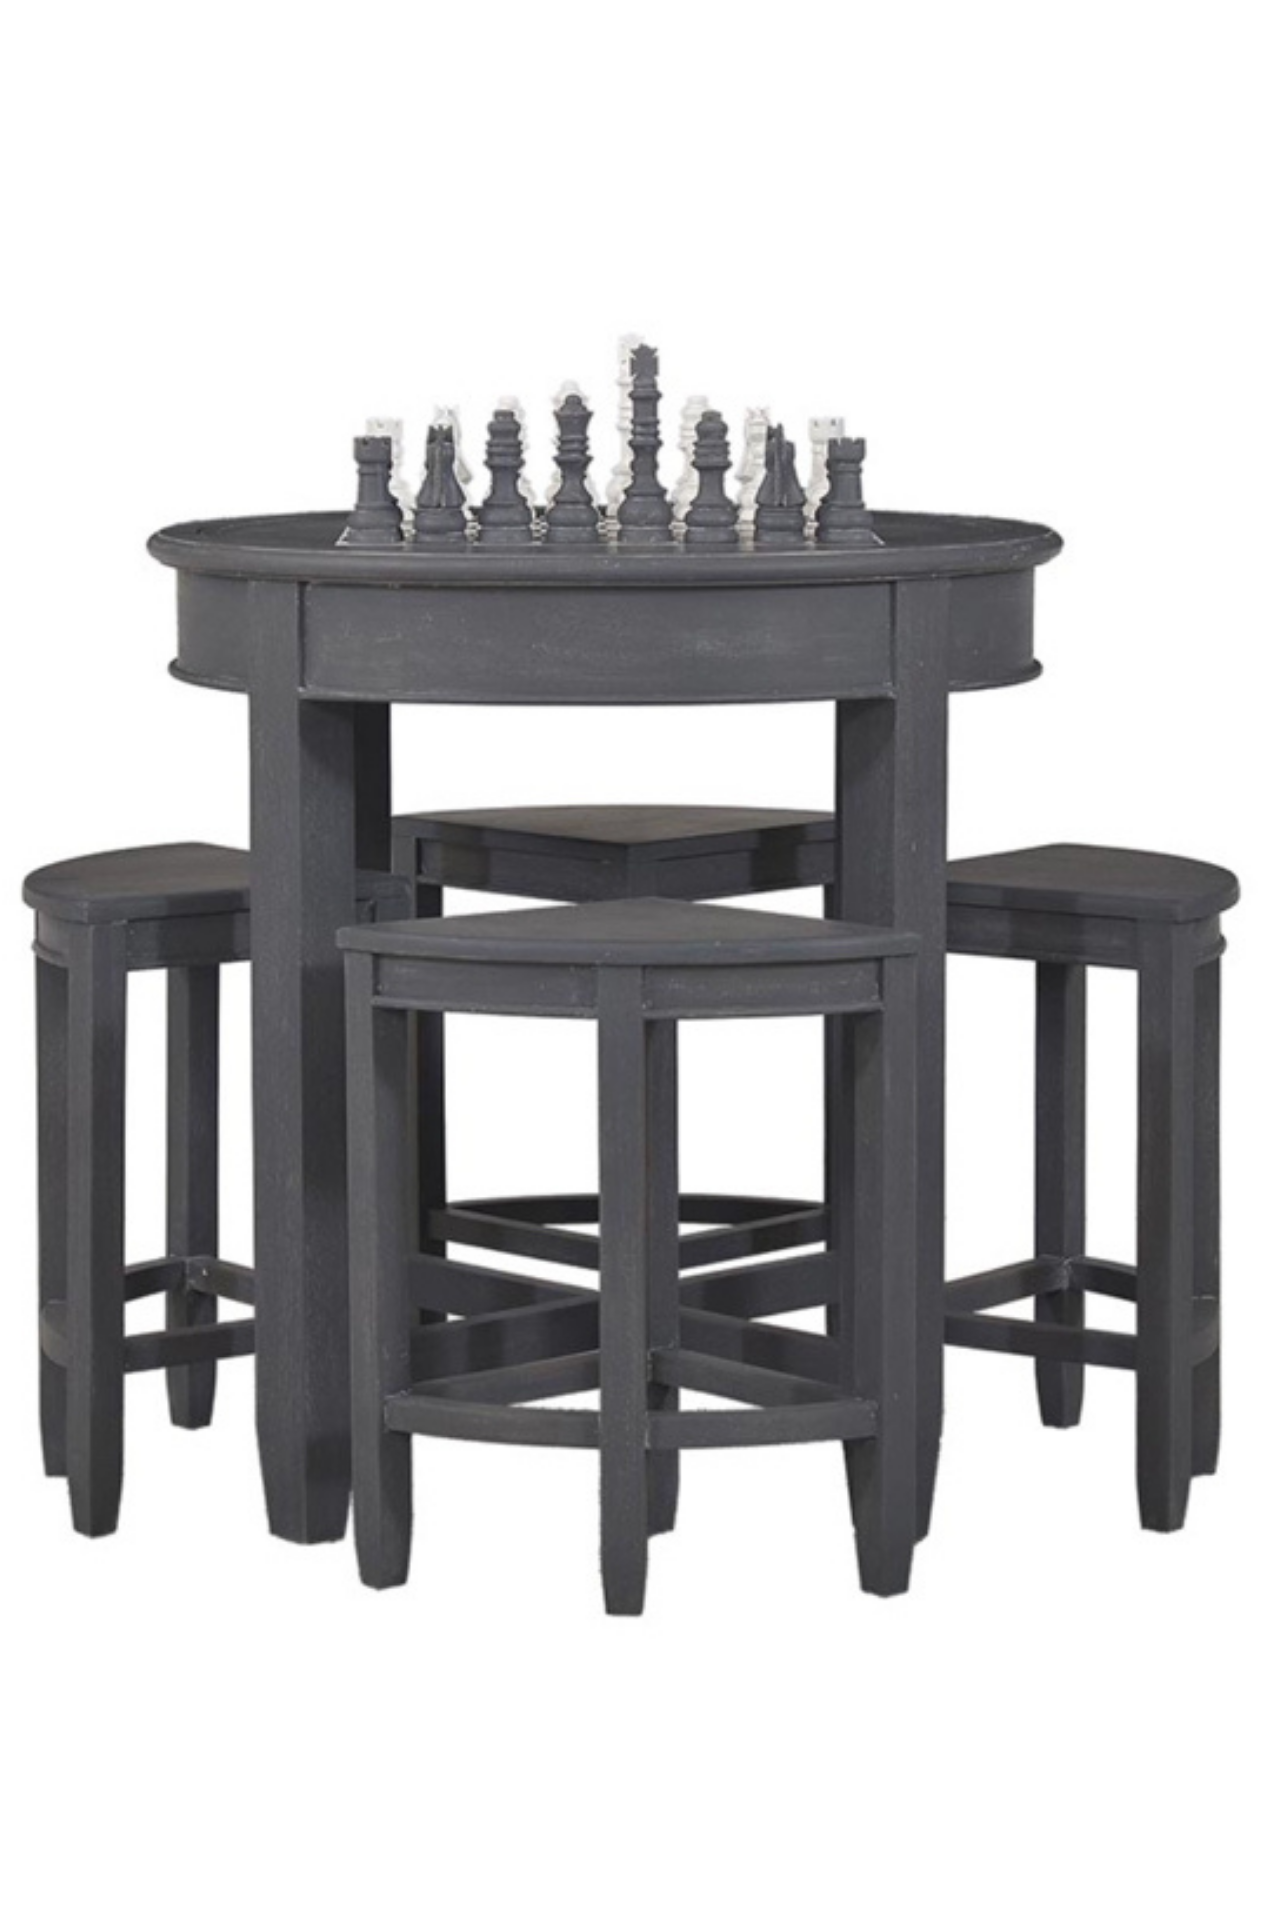 Aries Table Chess Set